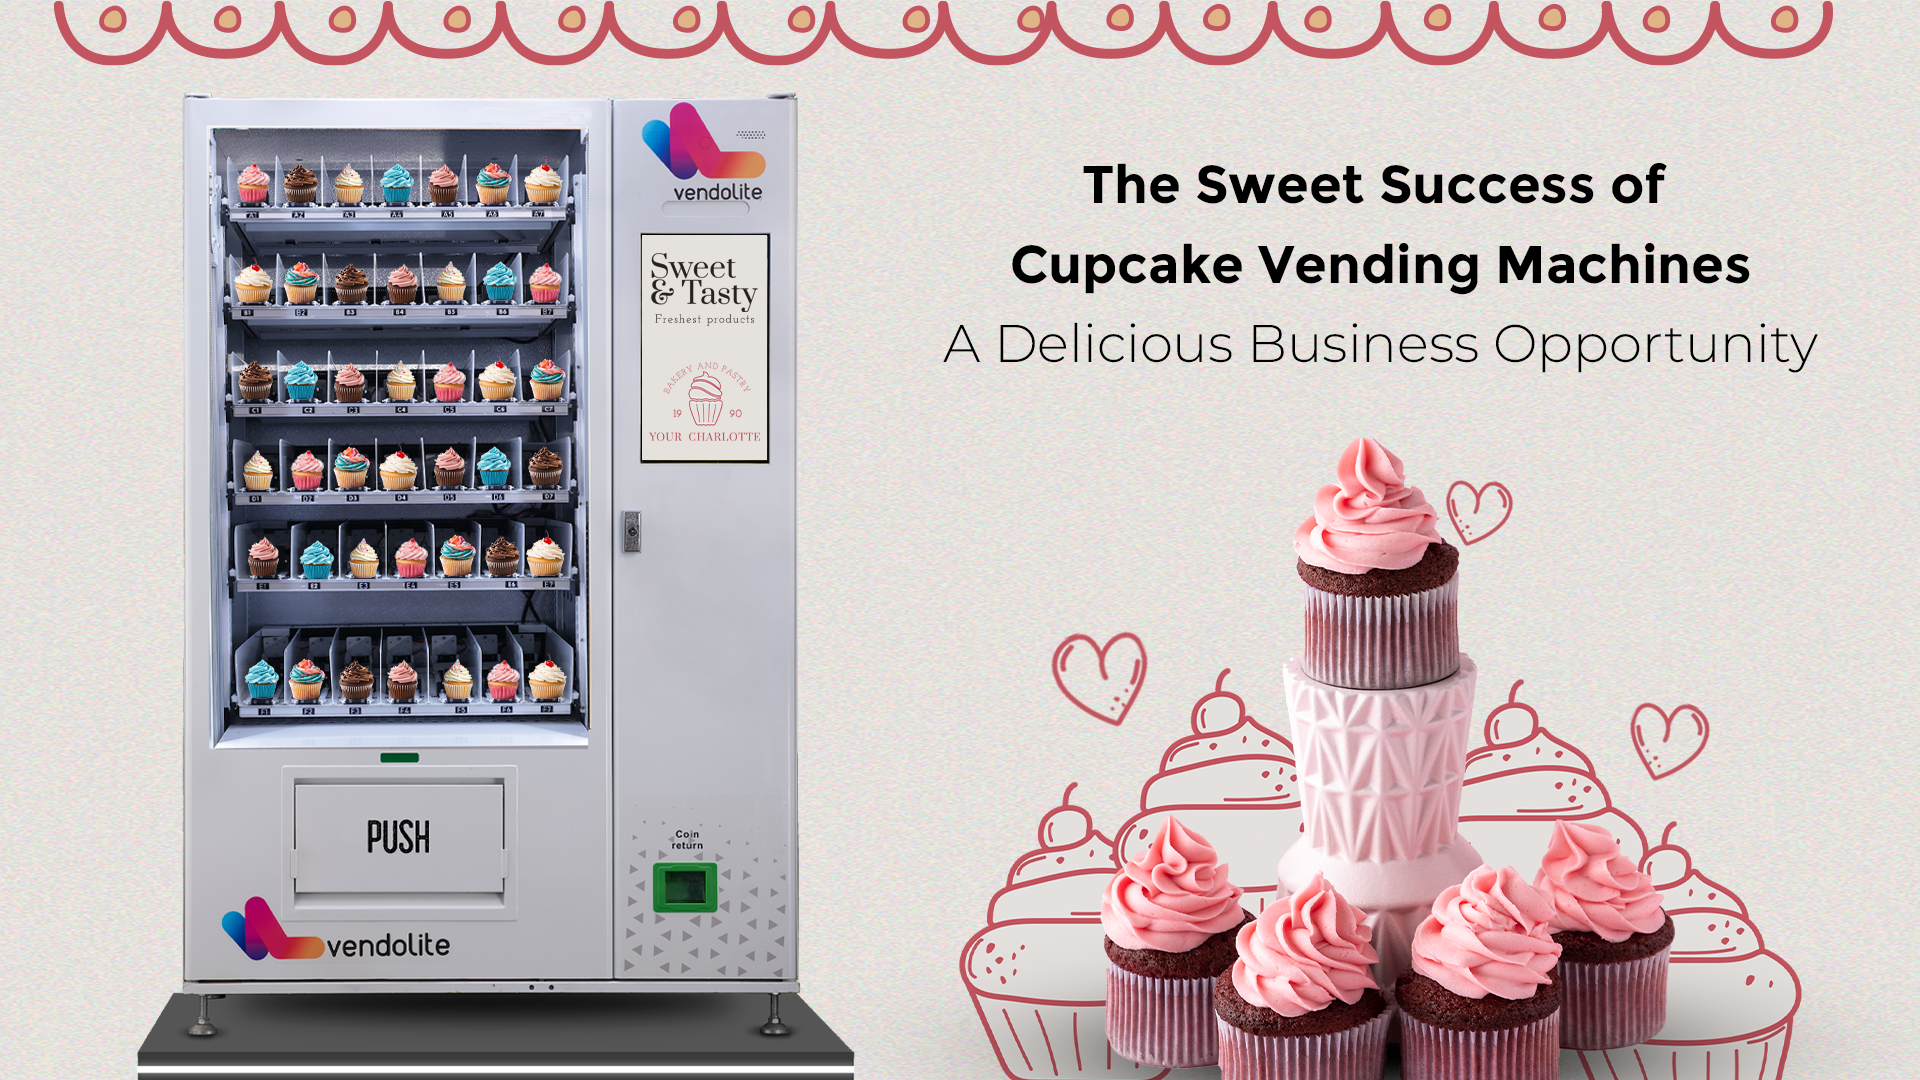 The Sweet Success of Cupcake Vending Machines: A Delicious Business Opportunity